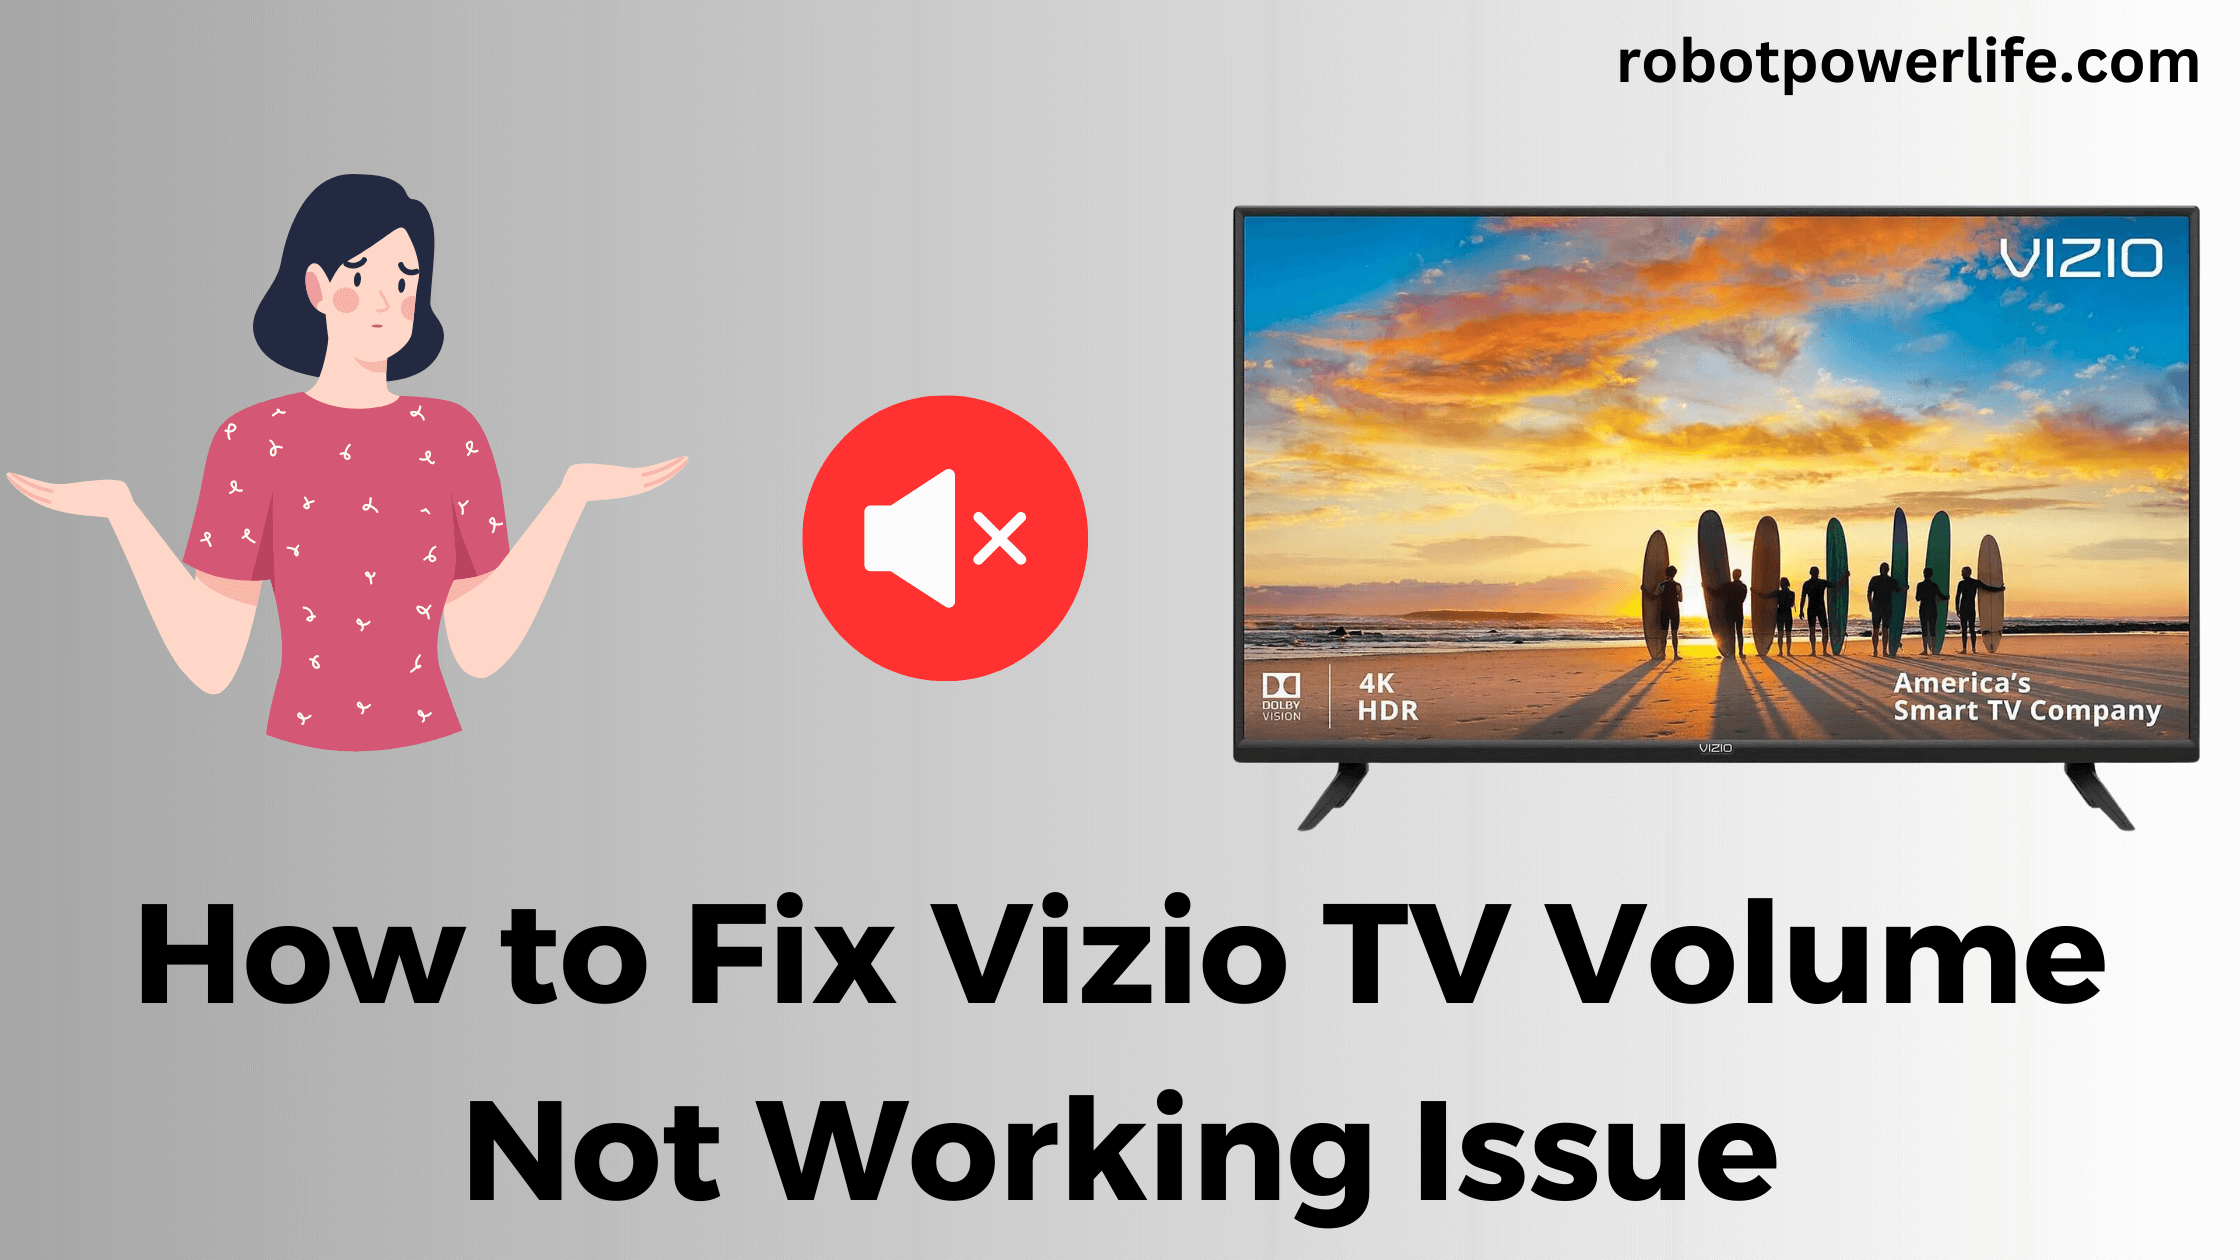 How to Fix Vizio TV Volume Not Working Issue